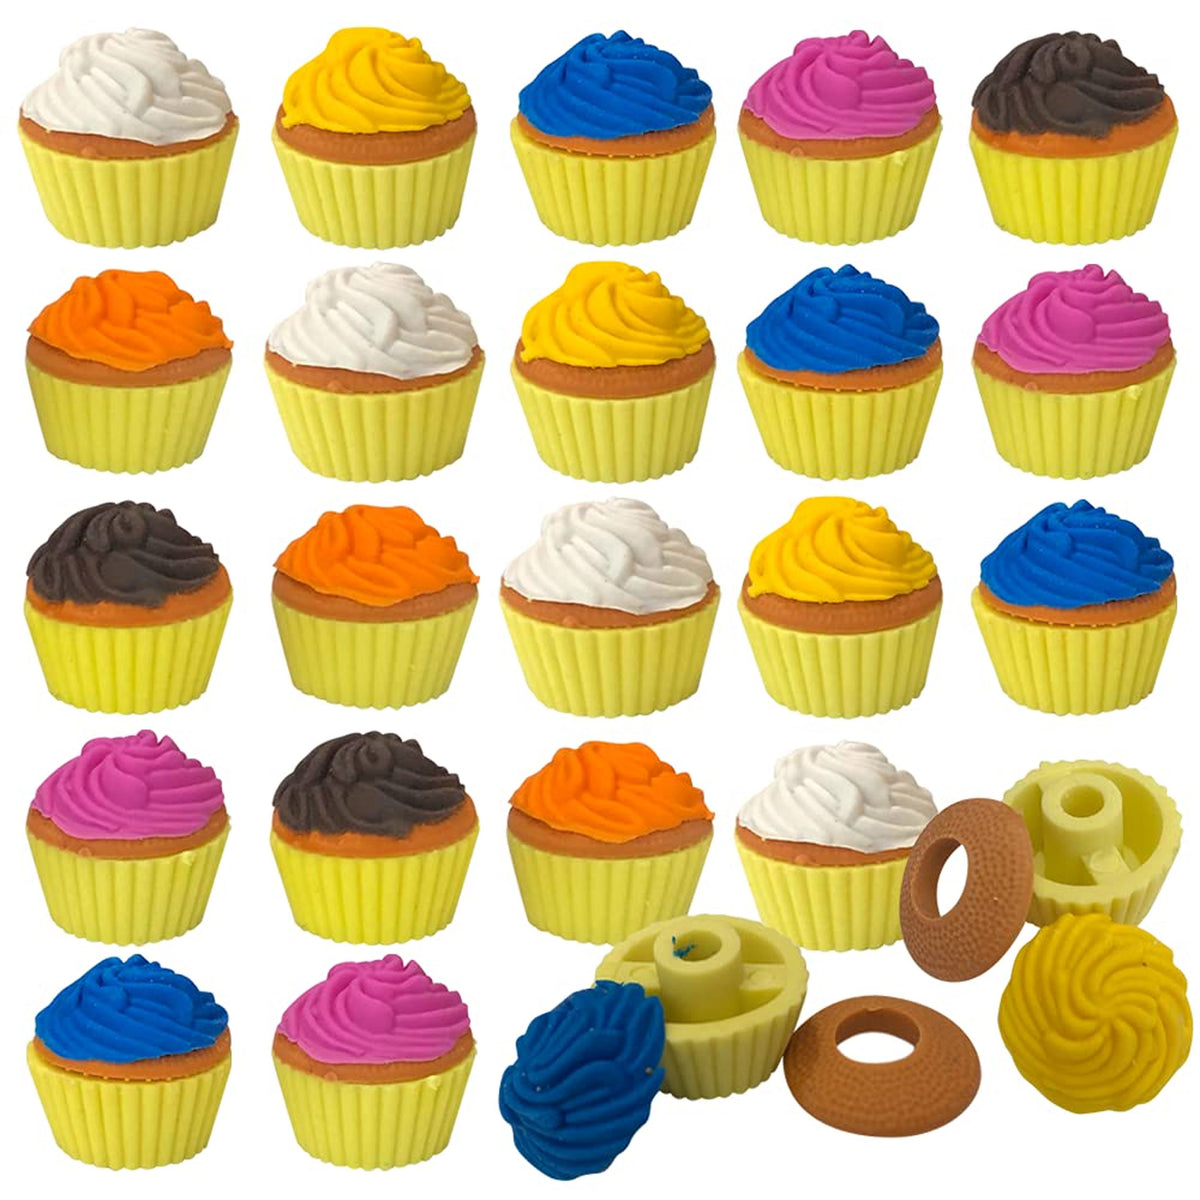 Scented Cupcake Erasers For Kids In Bulk- Assorted